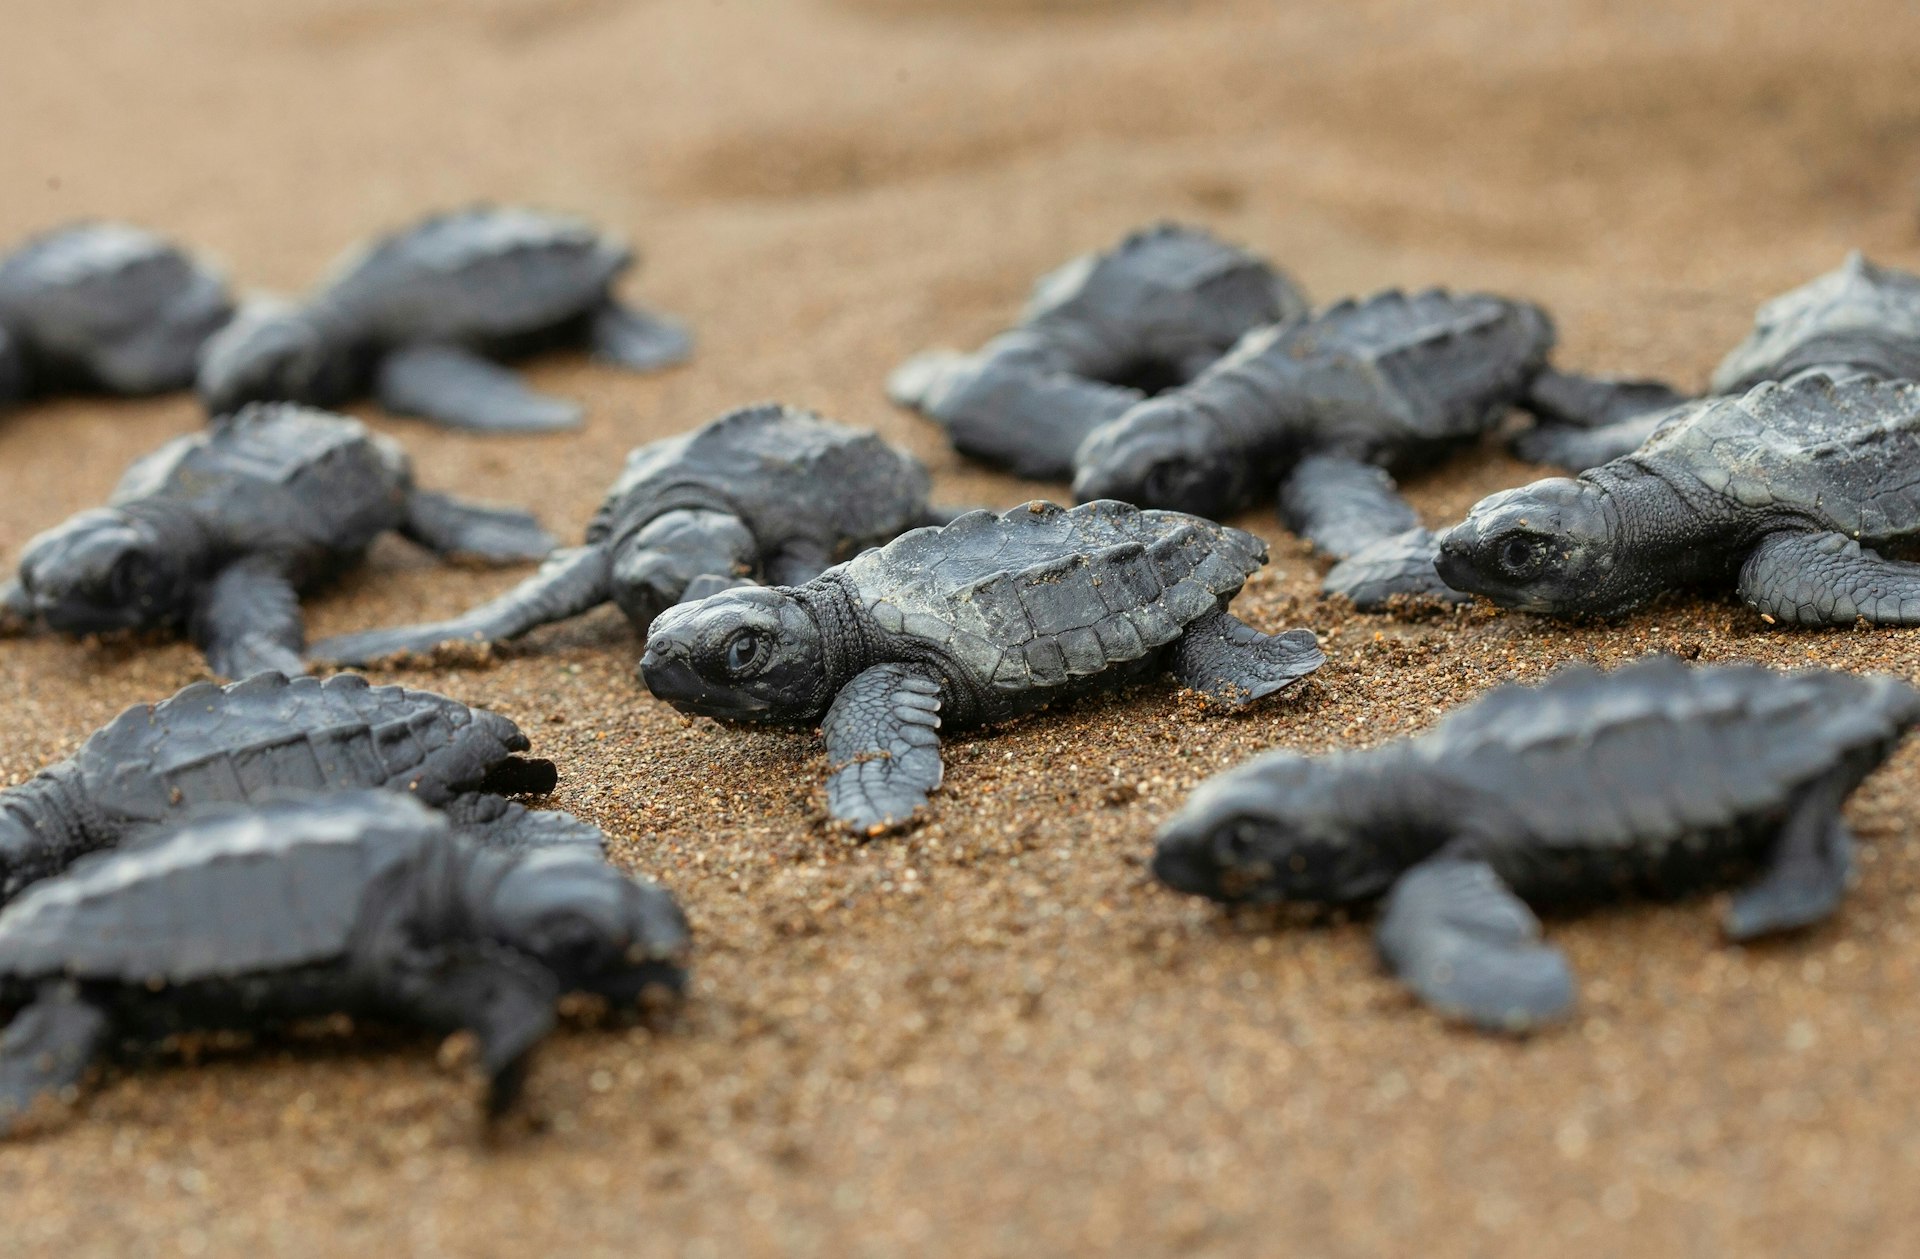 Baby olive ridley sea turtles on the beach